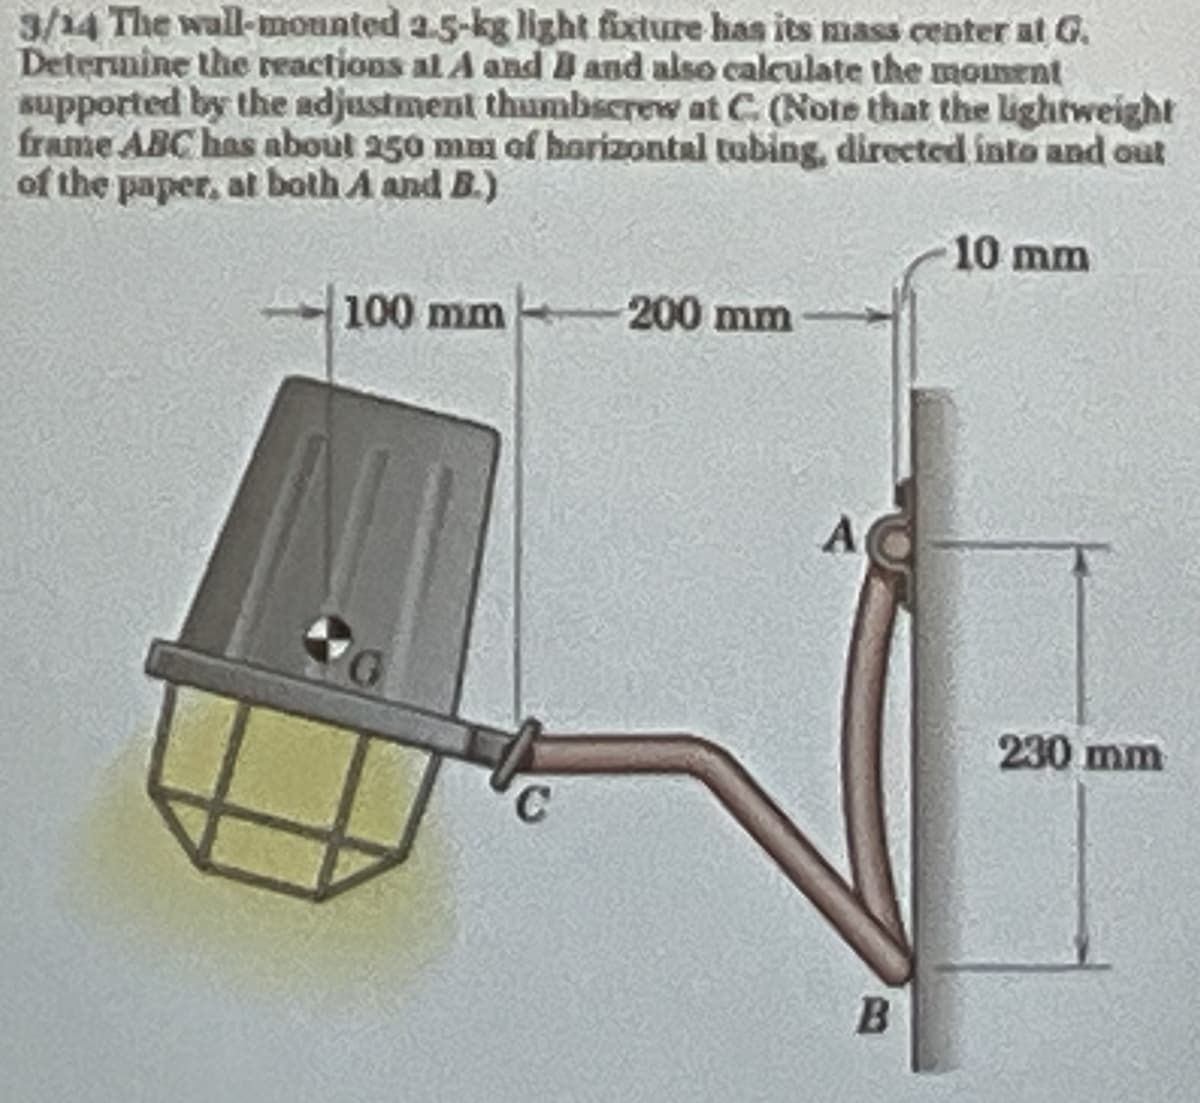 3/14 The wall-mounted 2.5-kg light fixture has its mass center at G.
Determine the reactions al A and B and also calculate the moment
supported by the adjustment thumbscrew at C. (Note that the lightweight
frame ABC has about 250 mm of horizontal tubing, directed into and out
of the paper, at both A and B.)
100 mm 200 mm
10 mm
A
B
230 mm